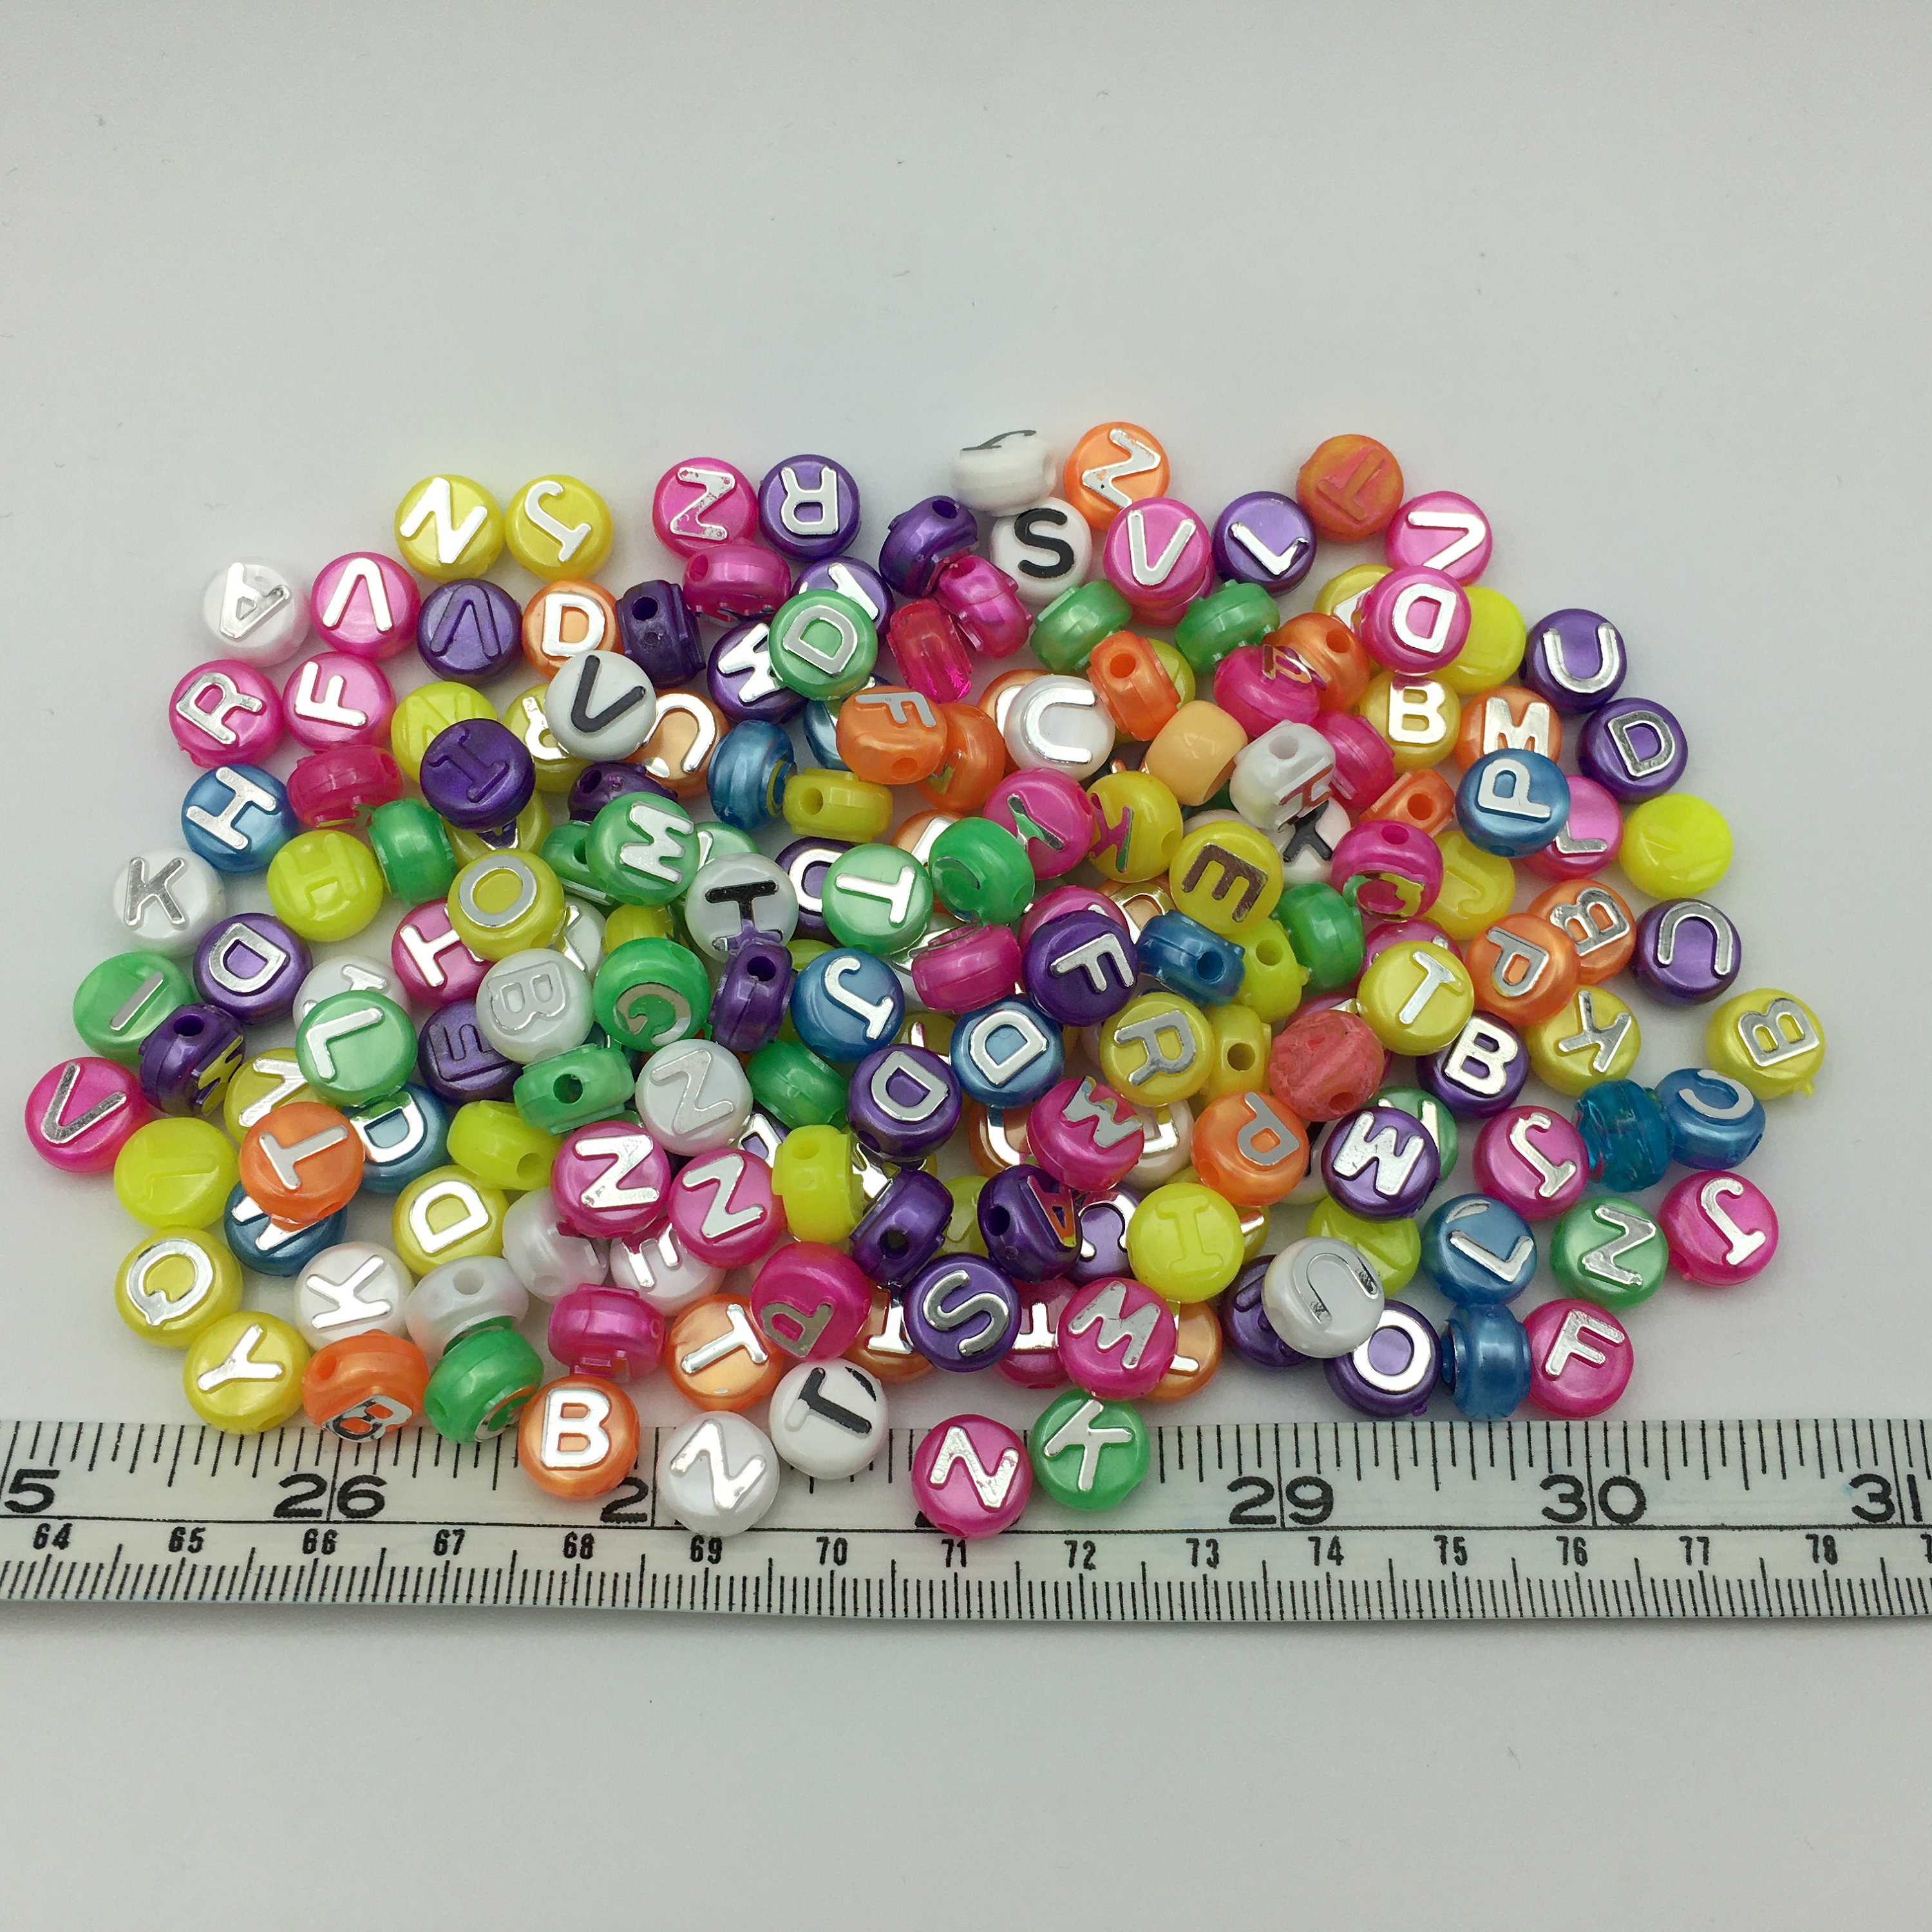 190 No Letter Beads, Multi Coloured Round Alphabet Beads With Letters, 9mm  Diameter Coin Letter Beads, Secondhand Beads for Crafting 